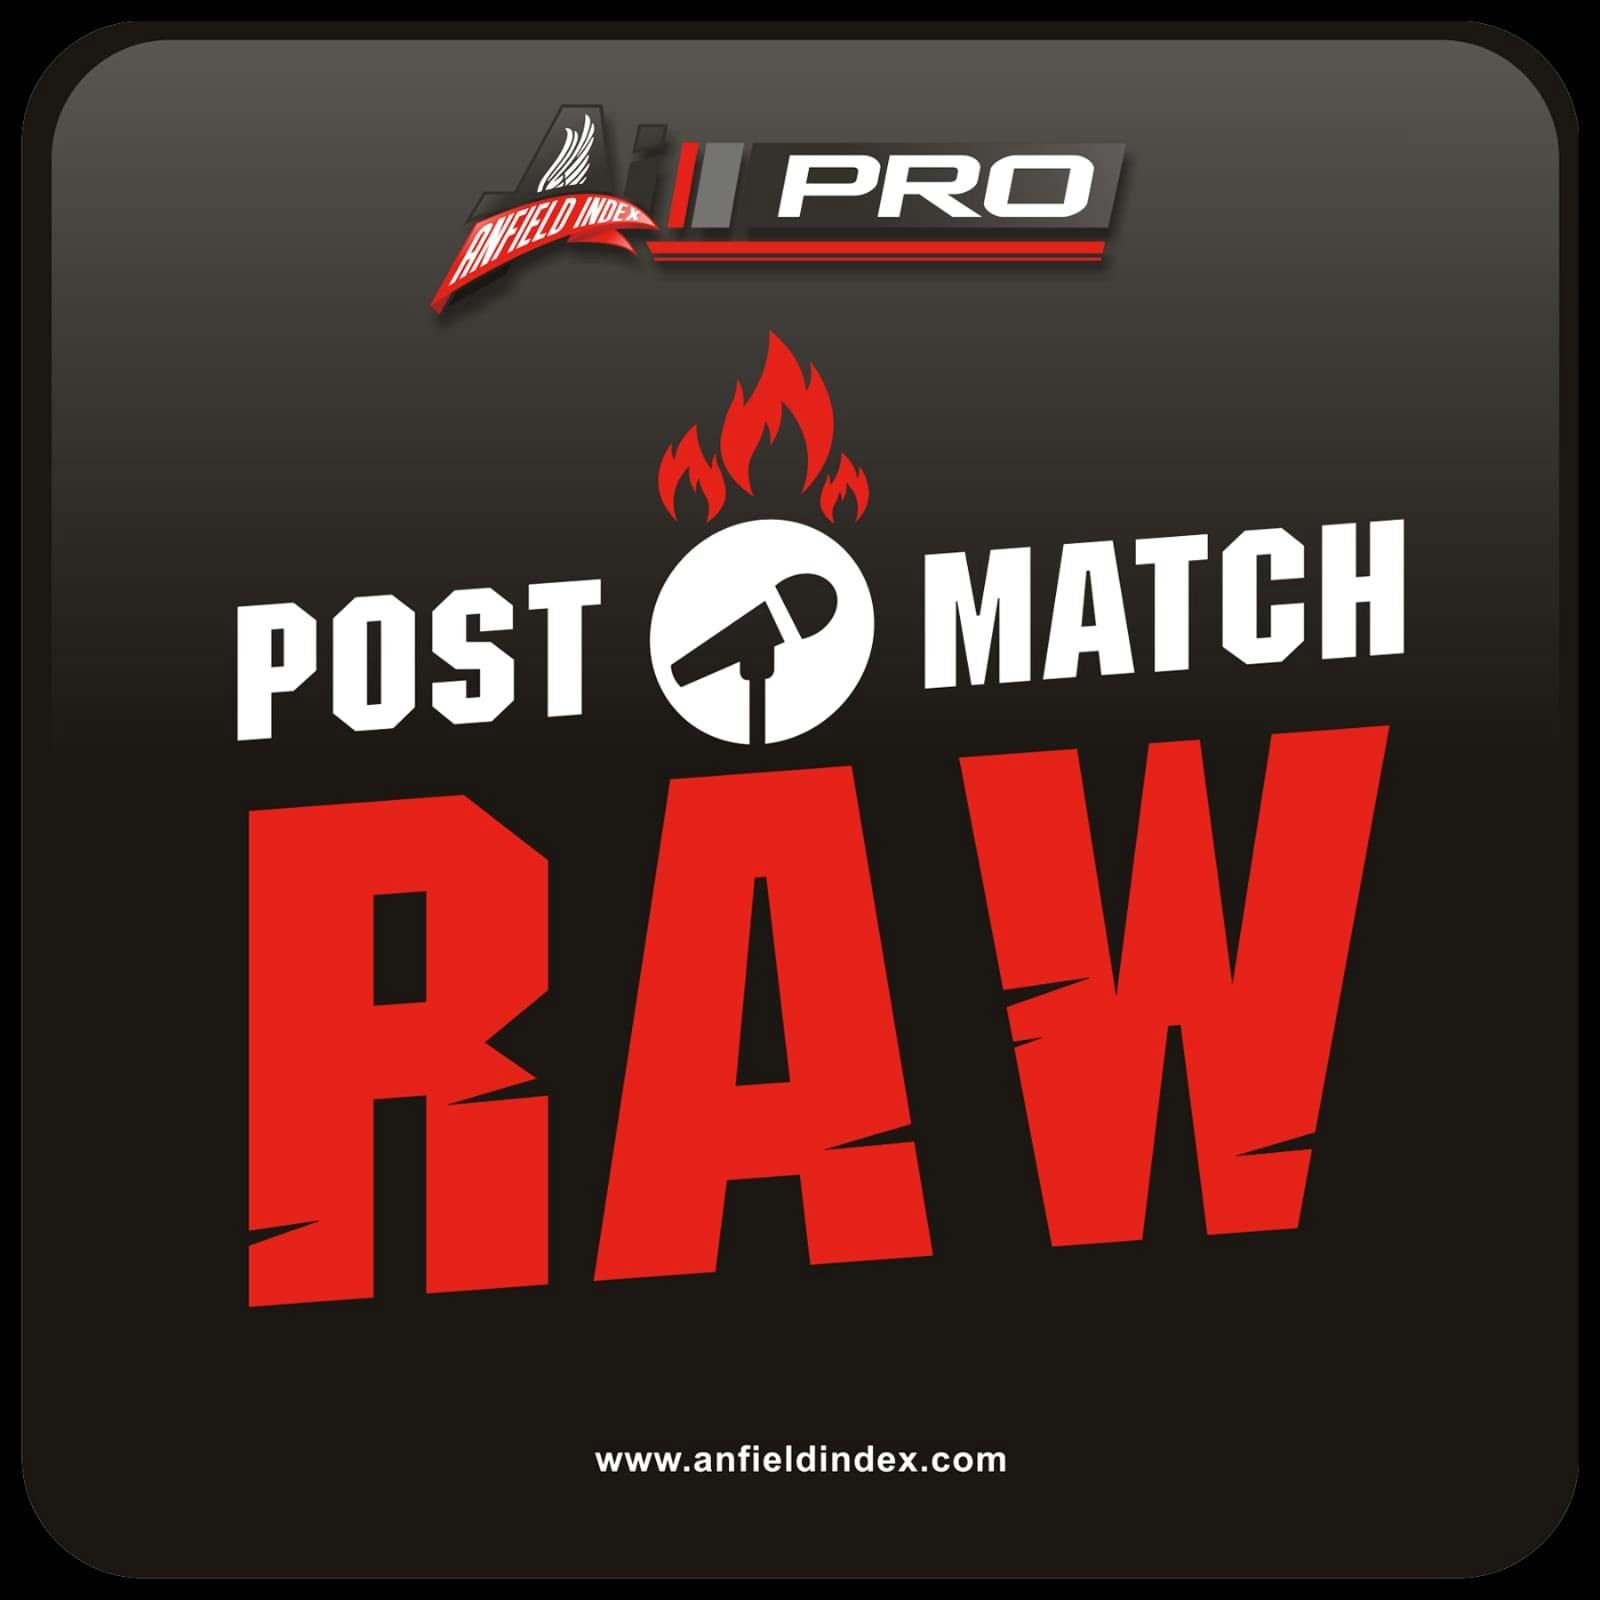 Everton Loss Reaction: Post Match Raw: THE END